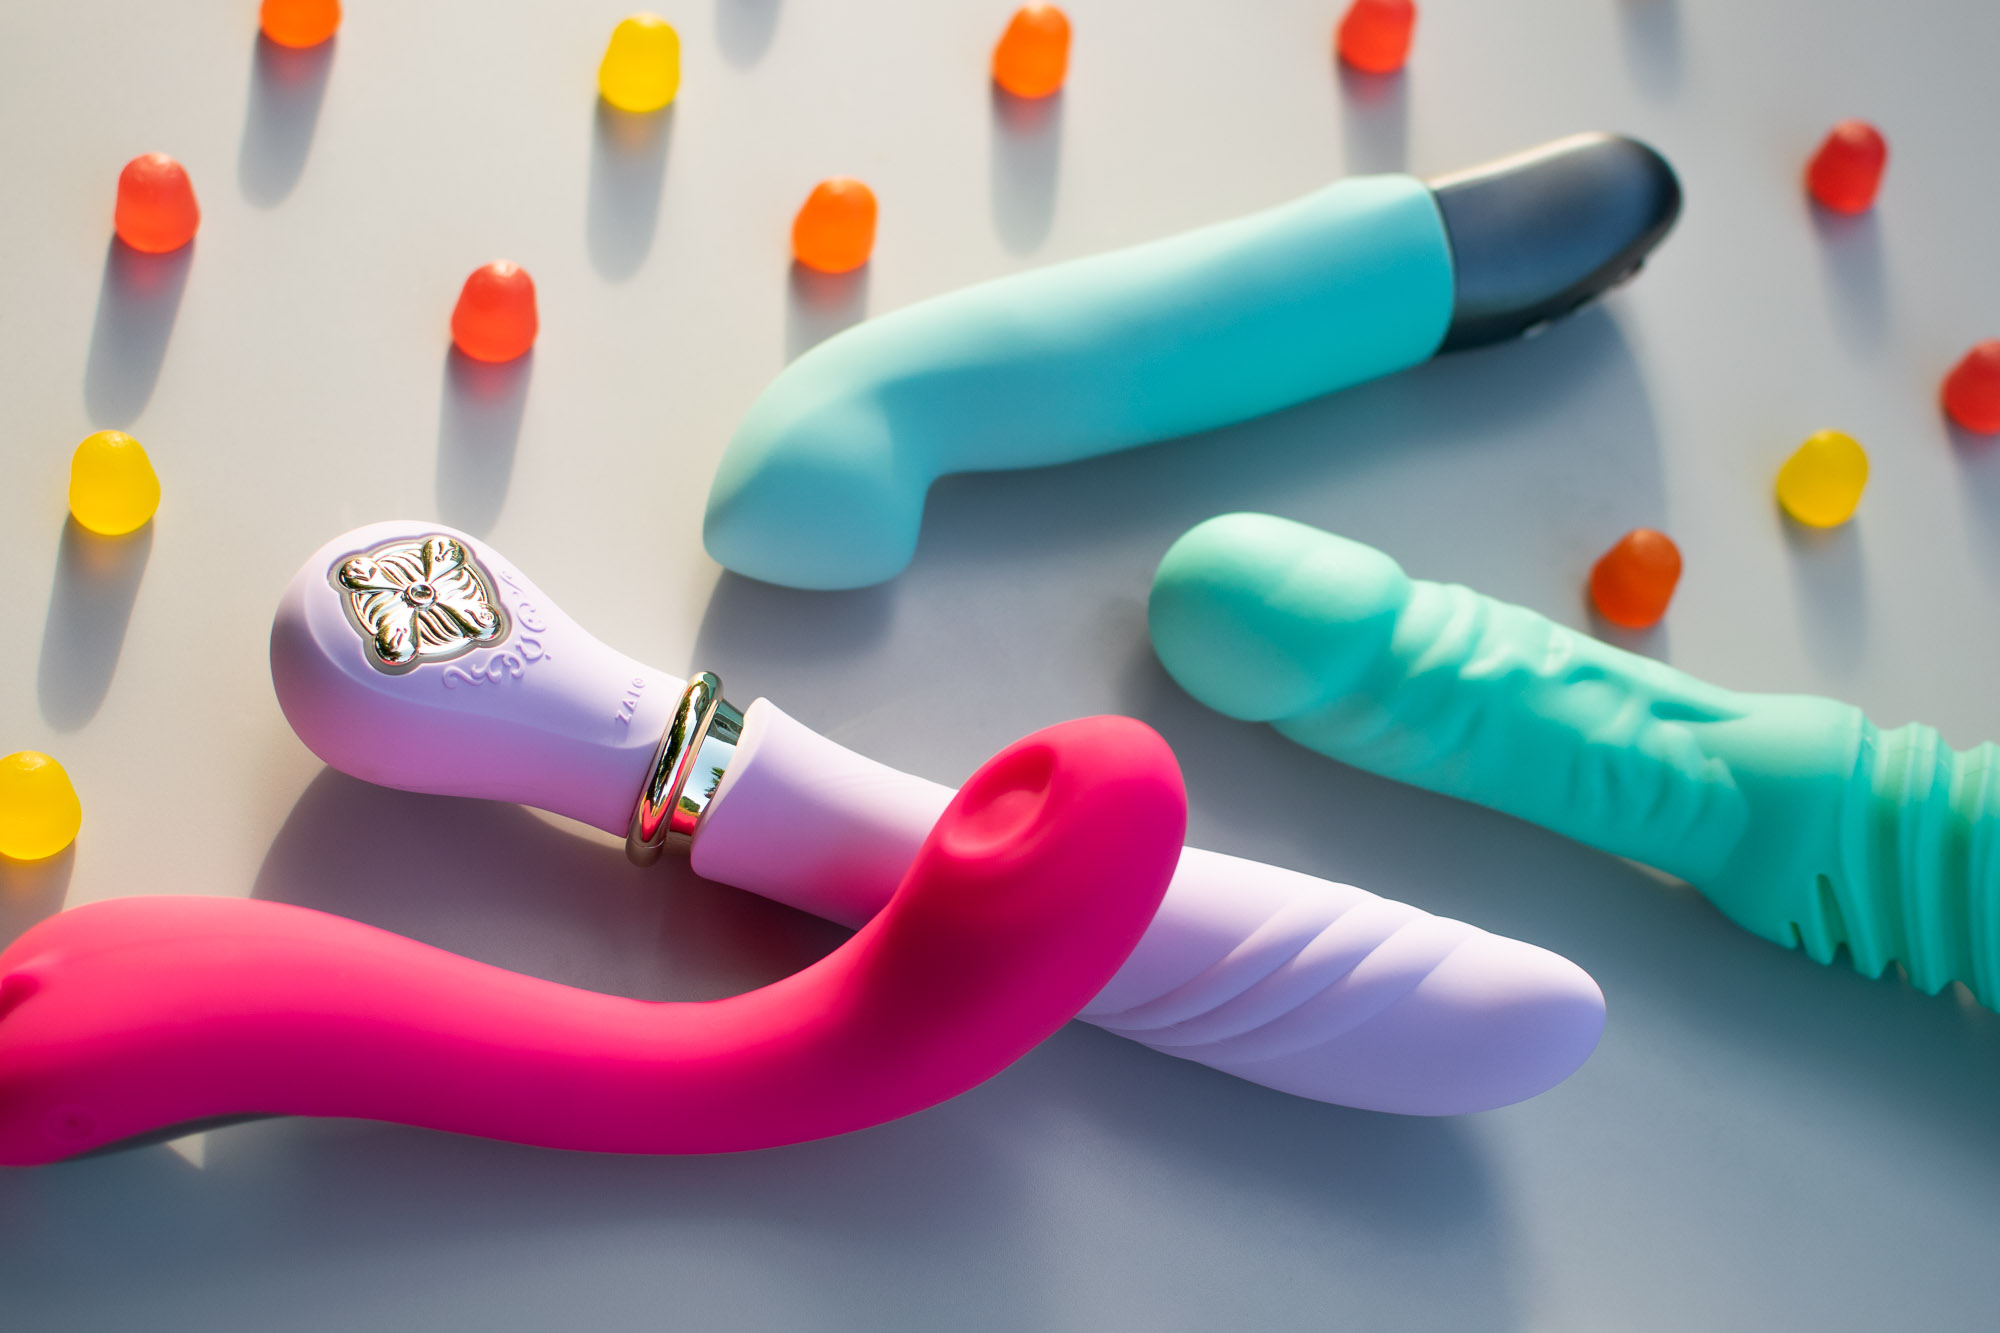 Other sex toys that move: Lovense Osci, Zalo Desire, Fun Factory Stronic G,...